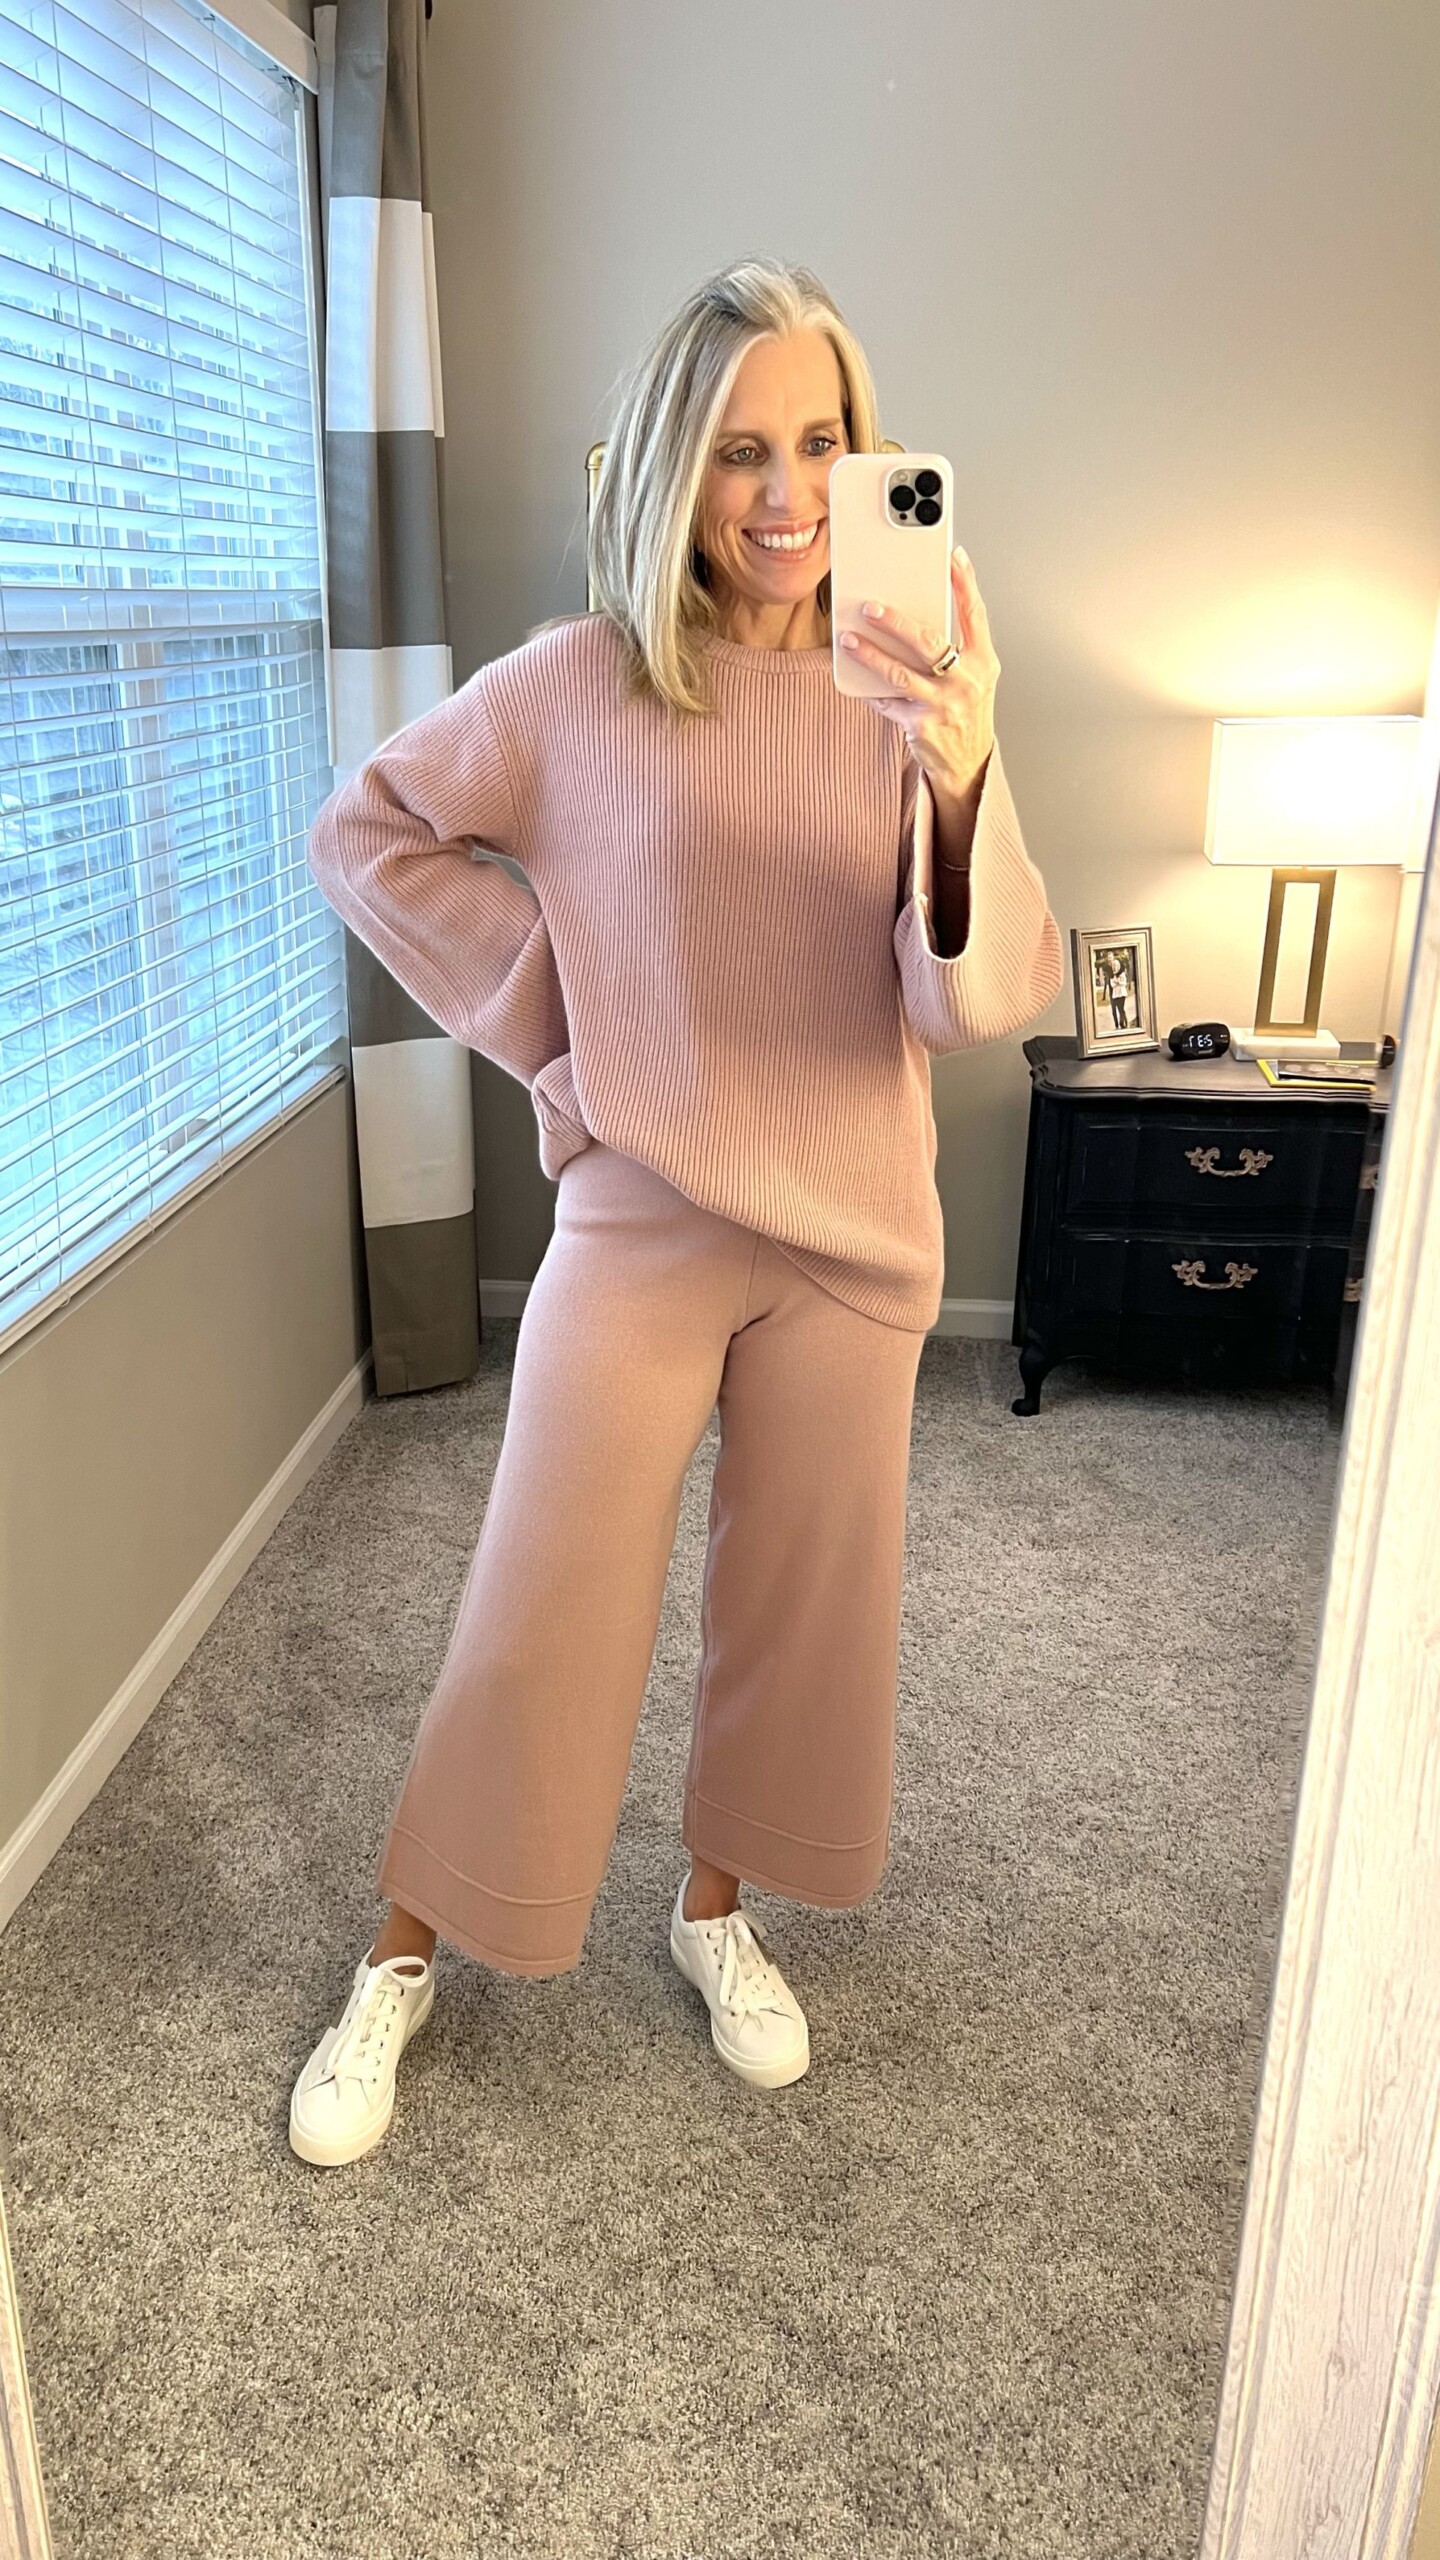 Sweater set from Amazon favorite brands